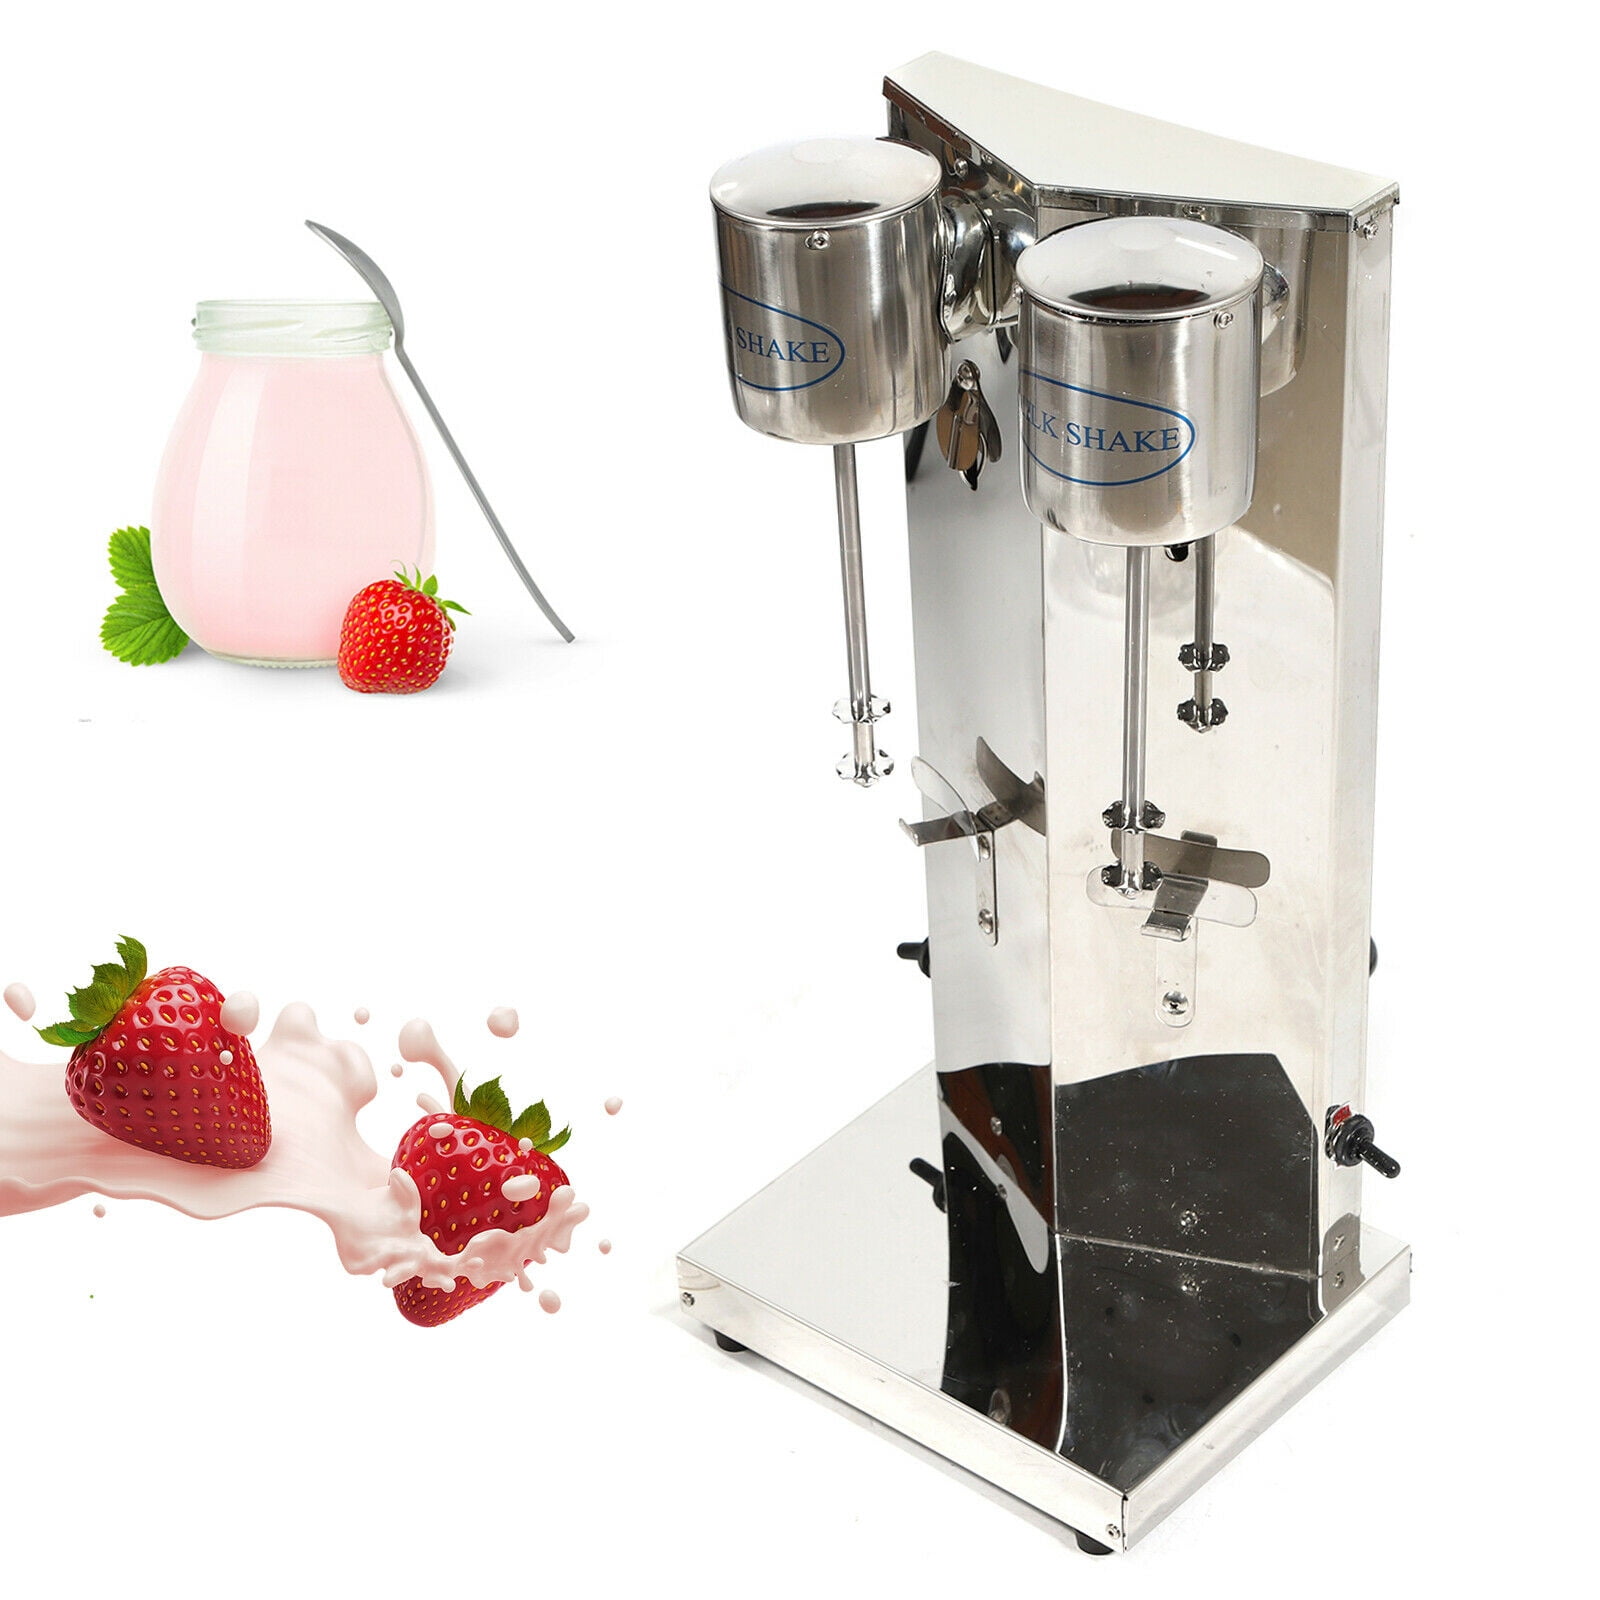 Classic Milkshake Maker, Stainless Steel Double Head 2-Speed Electric Drink  Mixer Machine 18000RMP 110V for Home 